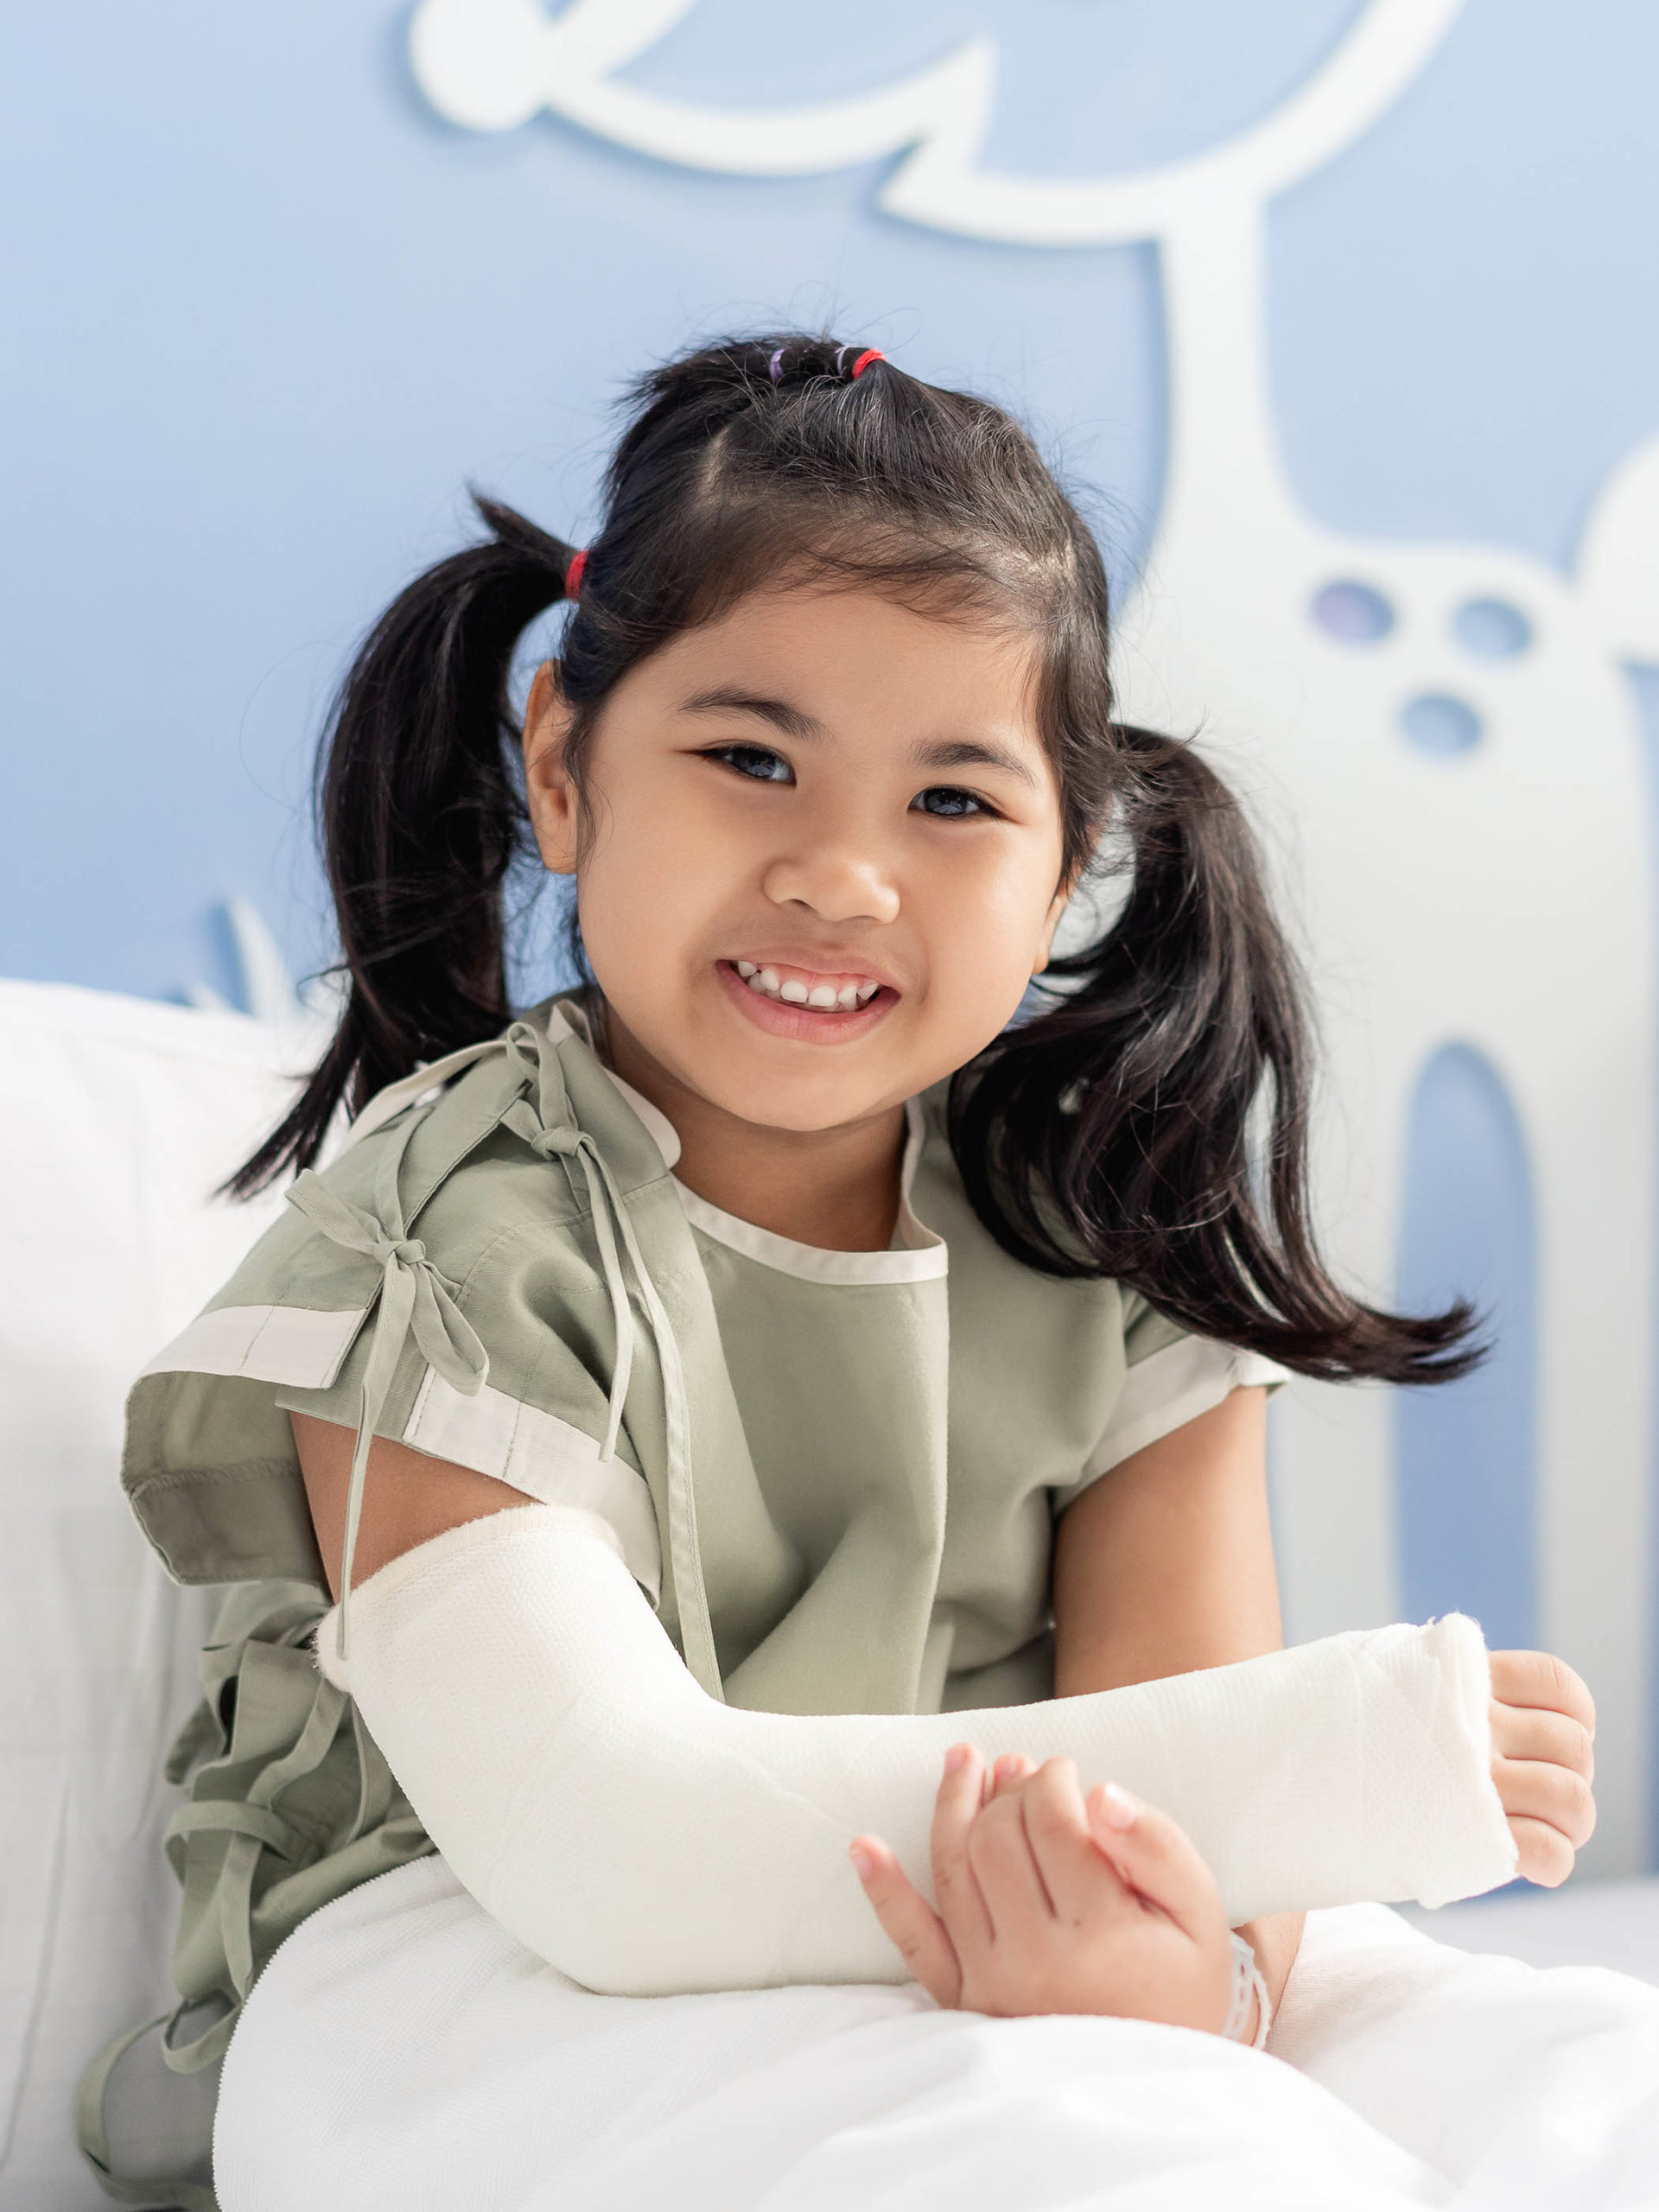 girl in hospital bed with broken arm in a cast